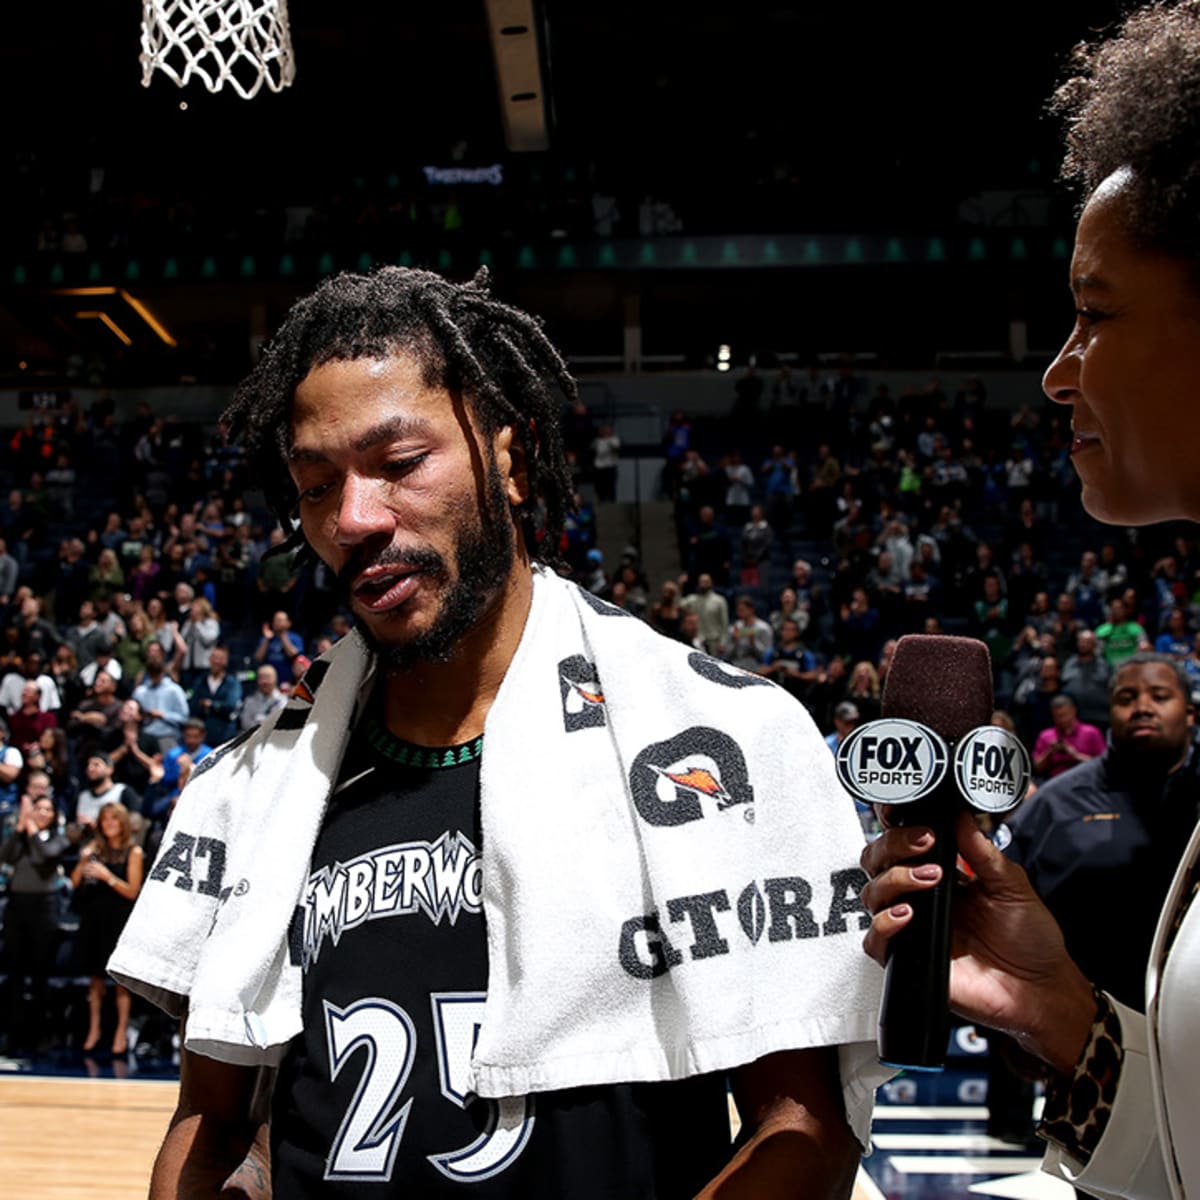 Derrick Rose's 50 point-game is the talk of the NBA on Thursday